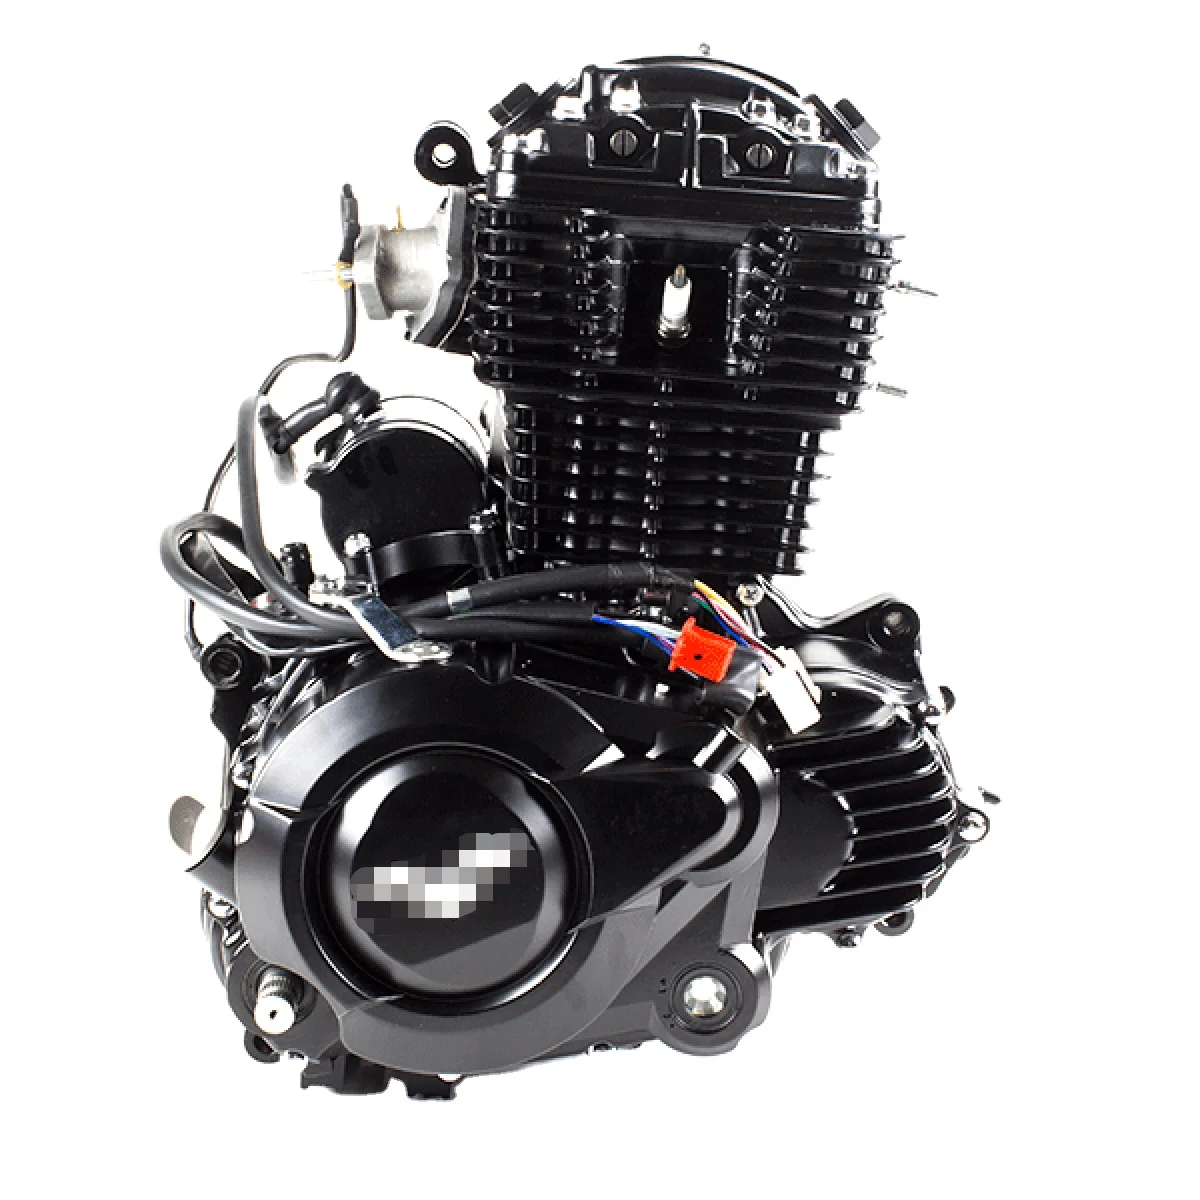 China High Quality Motorcycle Engine Assembly Other 125cc Engines Motorcycle For Suzuki Ruishuang en125-3f